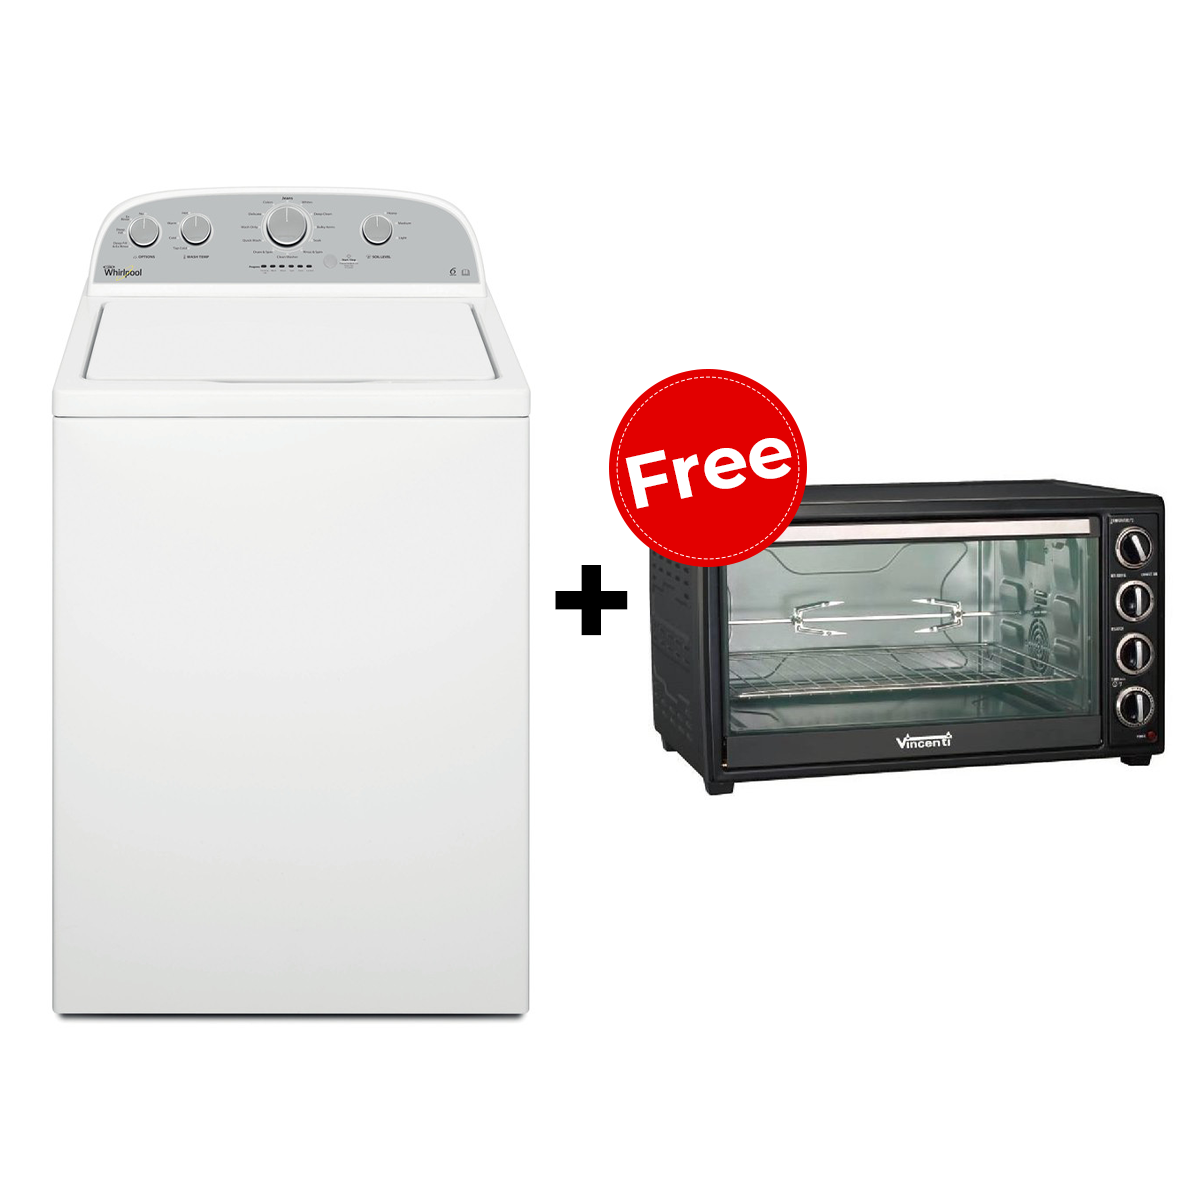 Ramadan Special Offer - WASHING MACHINE = VINCENTI 100L ELECTRIC OVEN